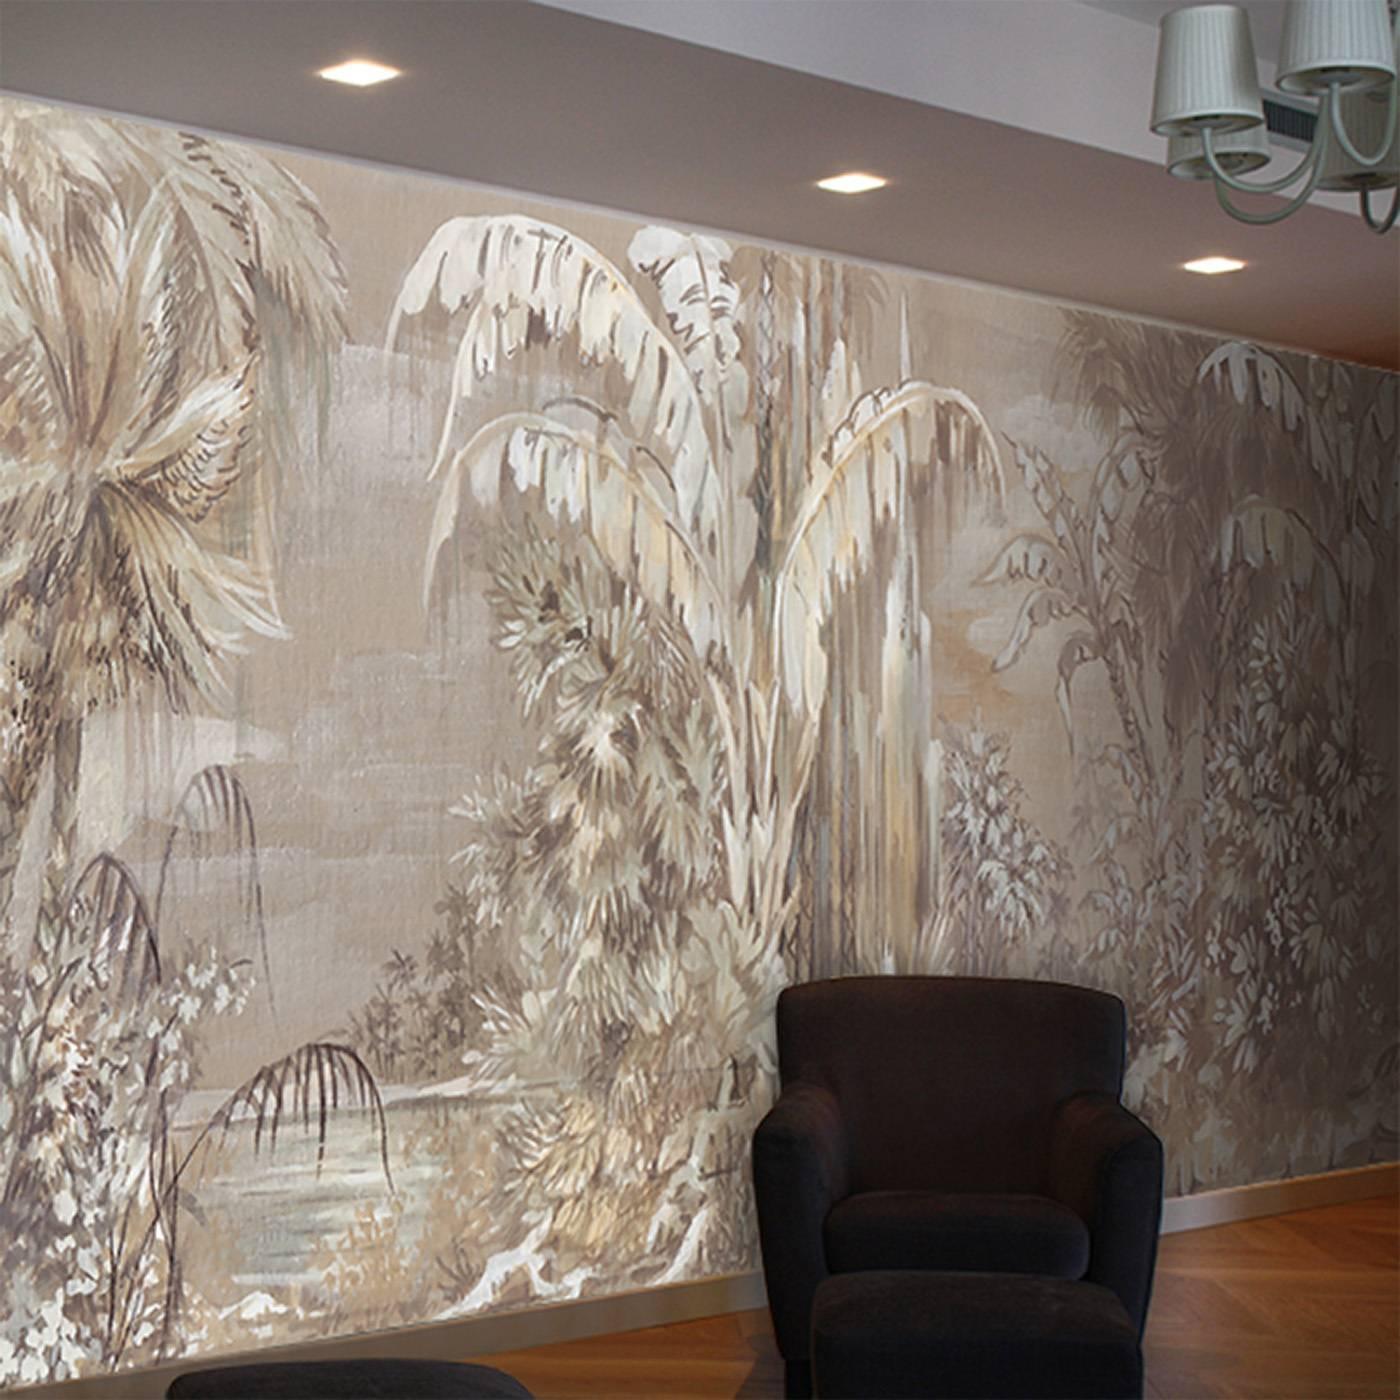 This wallpaper was entirely painted freehand on paper without a preliminary pencil sketch. The result is a magnificent piece of wall decoration in beige and white that is spectacular and will make a statement wherever placed. The silvery tones of